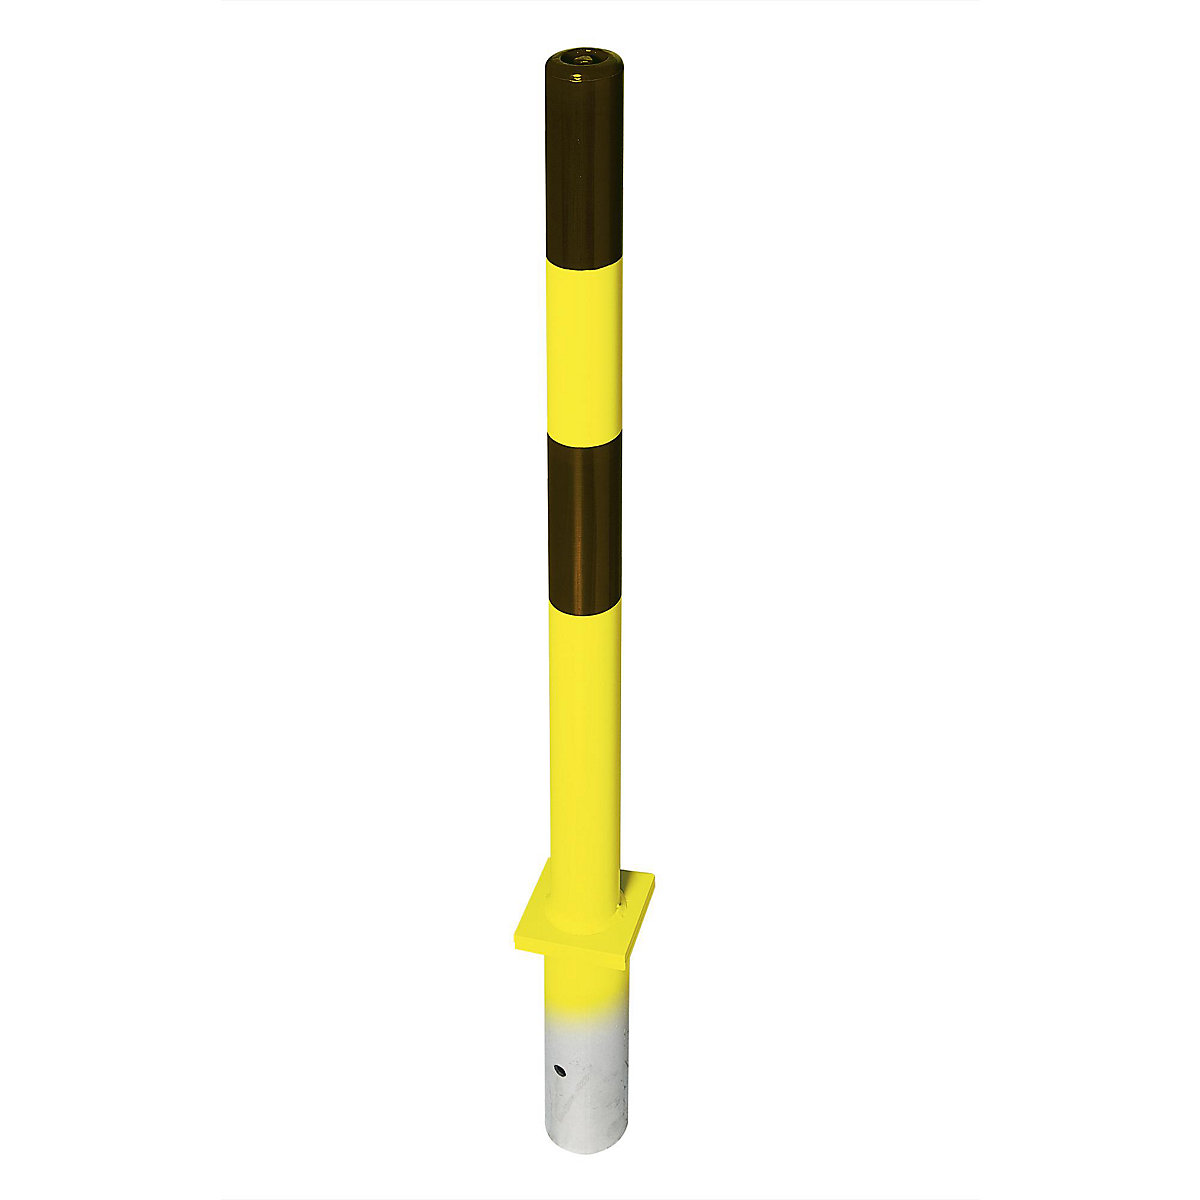 Barrier post made of steel, for setting in concrete, Ø 76 mm, black/yellow, 2 chain eyelets-4